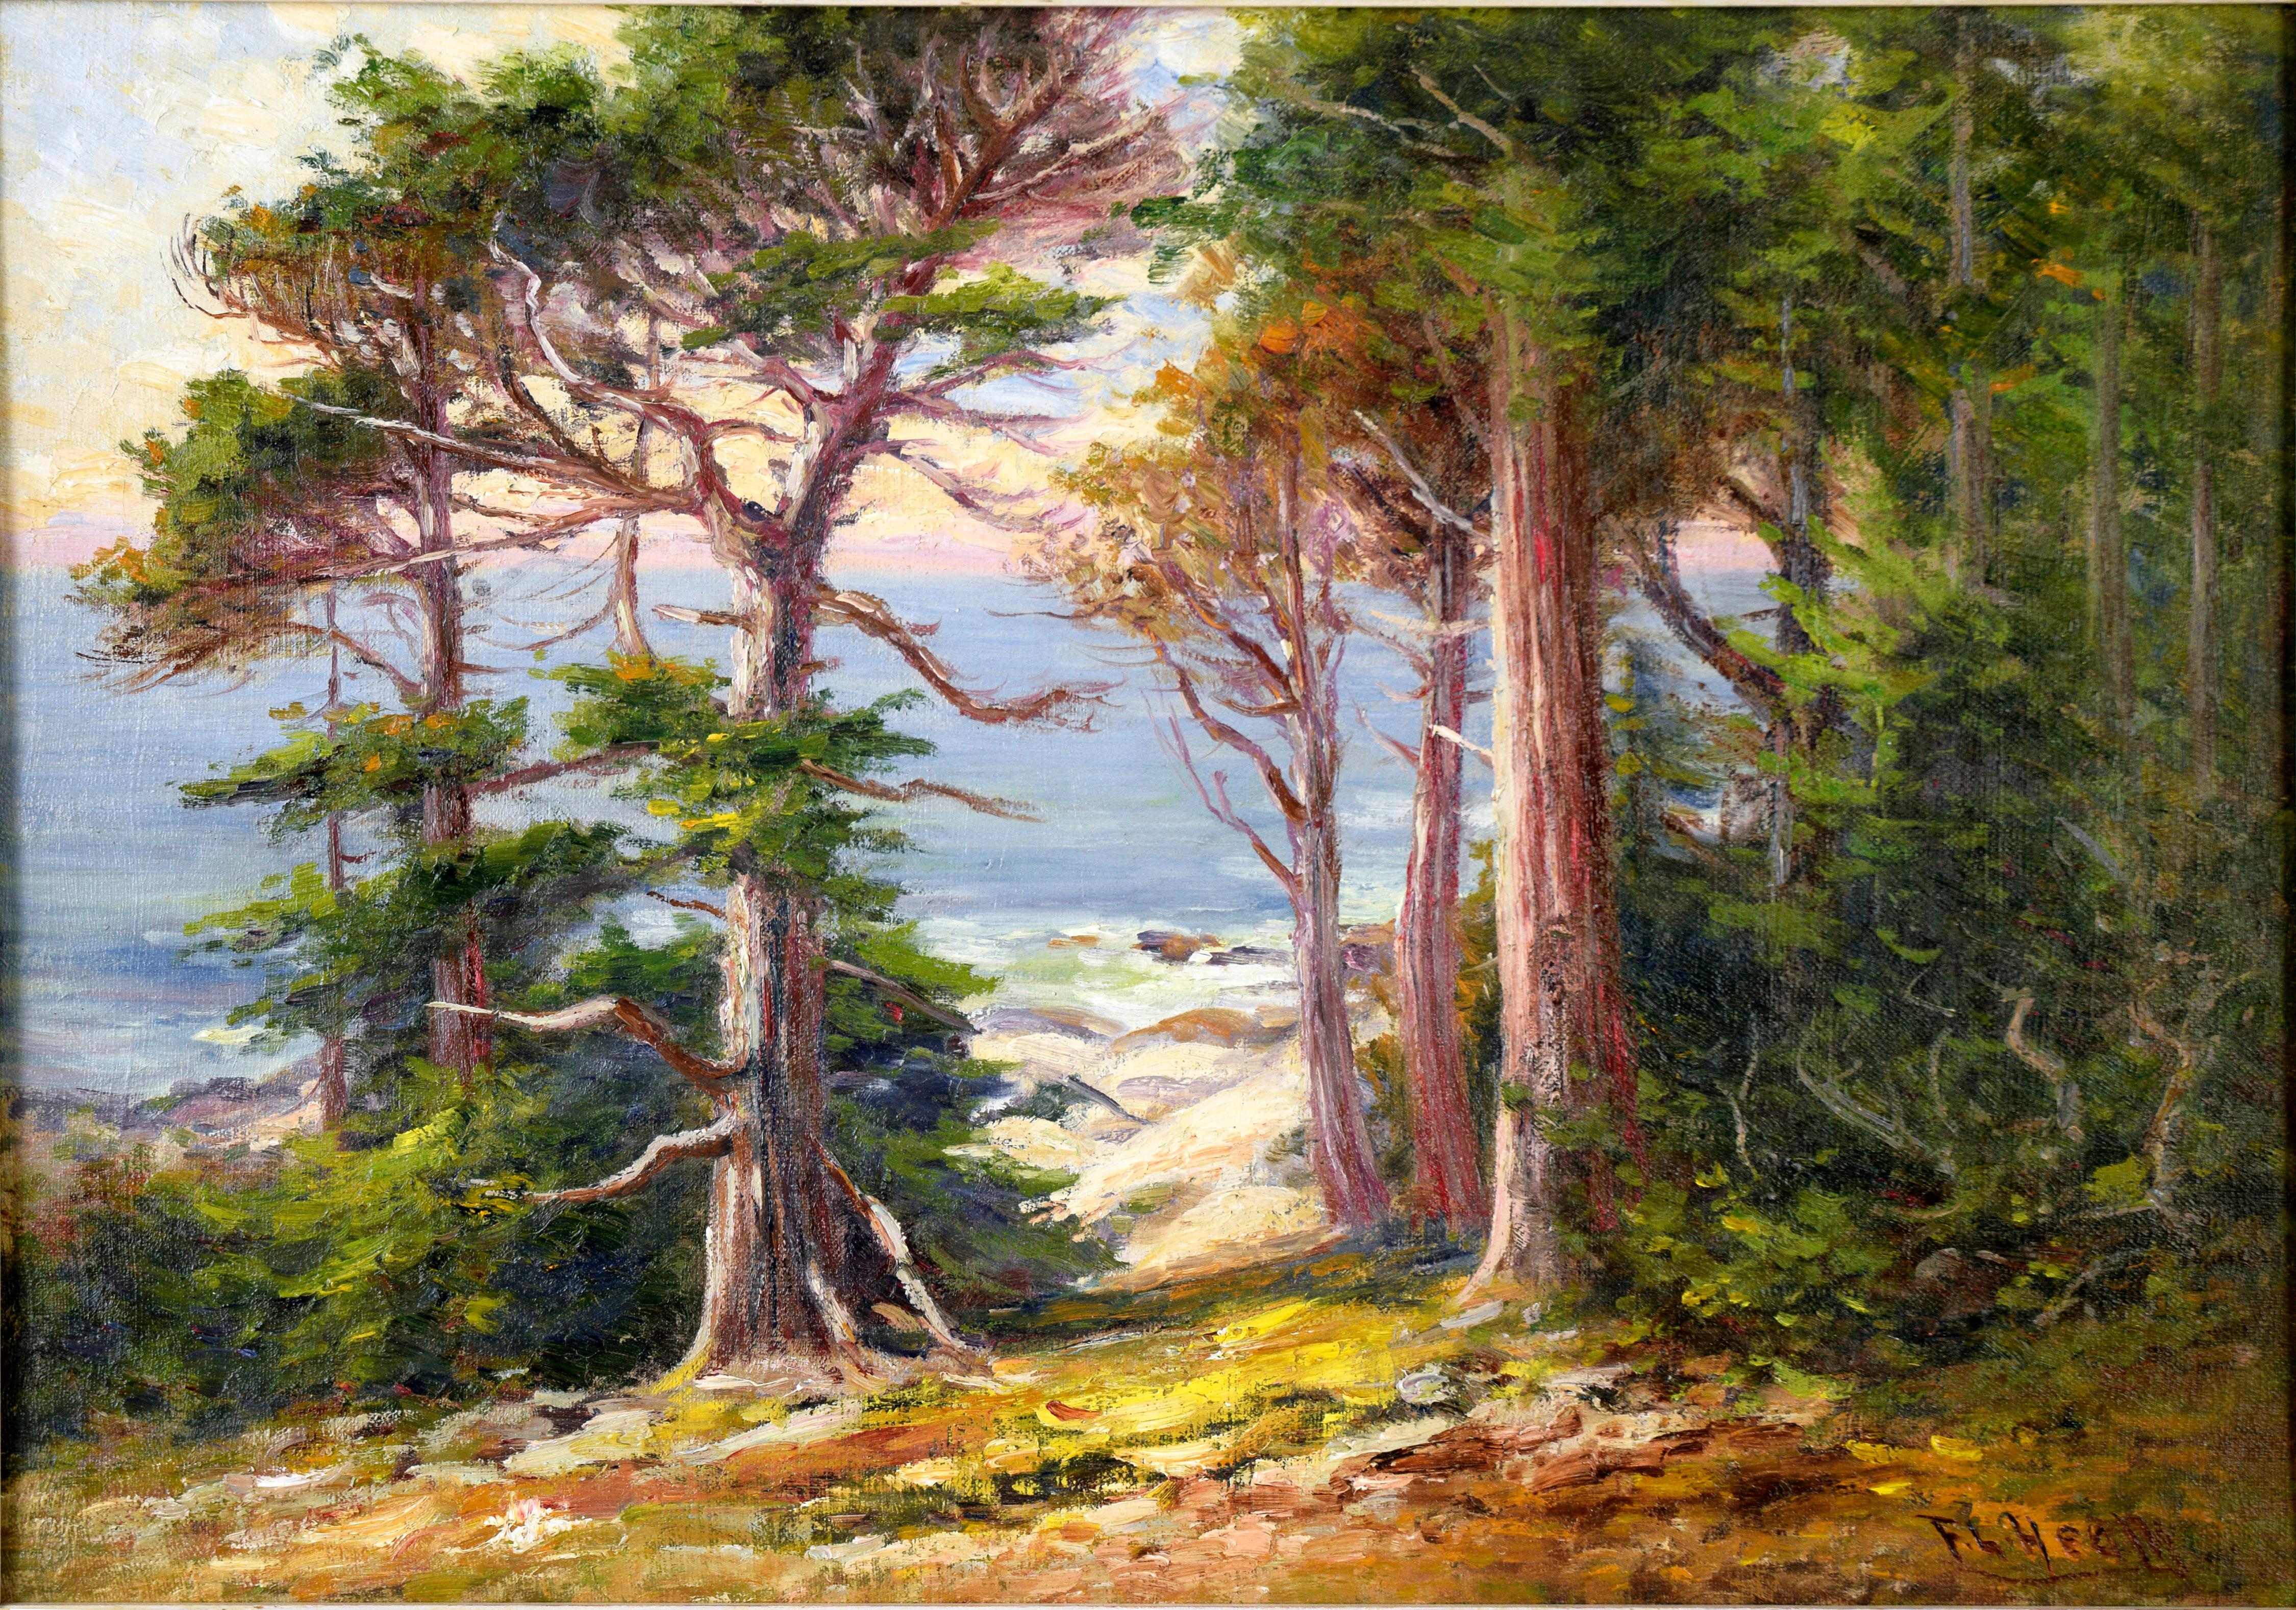 Old 17 Mile Drive, Carmel California Landscape Early 1900s Oil on Linen - American Impressionist Painting by Frank Lucien Heath